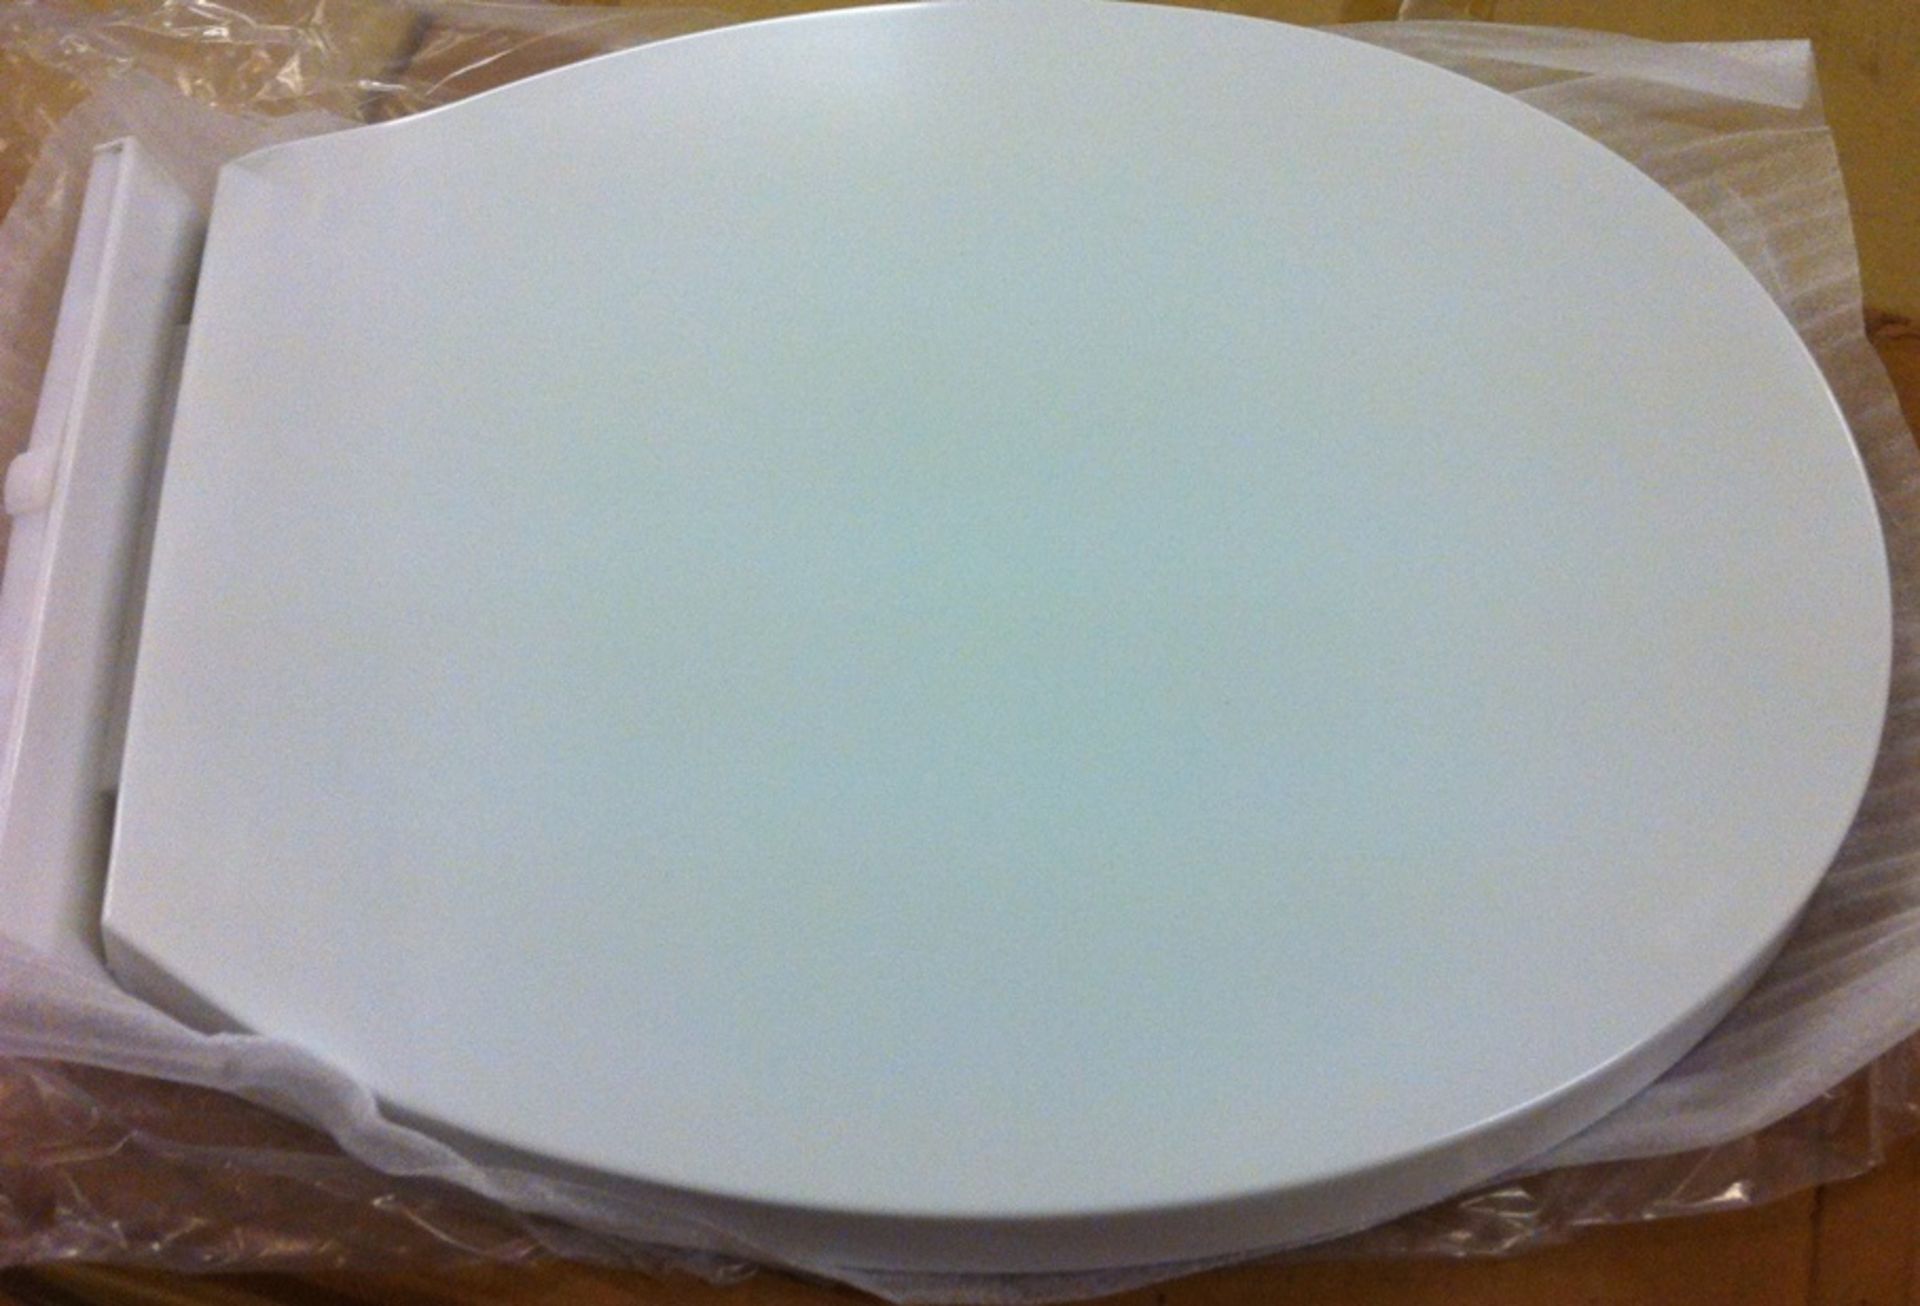 10 x Deluxe Soft Close White Toilet Seats - Brand New Boxed Stock - CL034 - Ideal For Resale - Vogue - Image 3 of 6